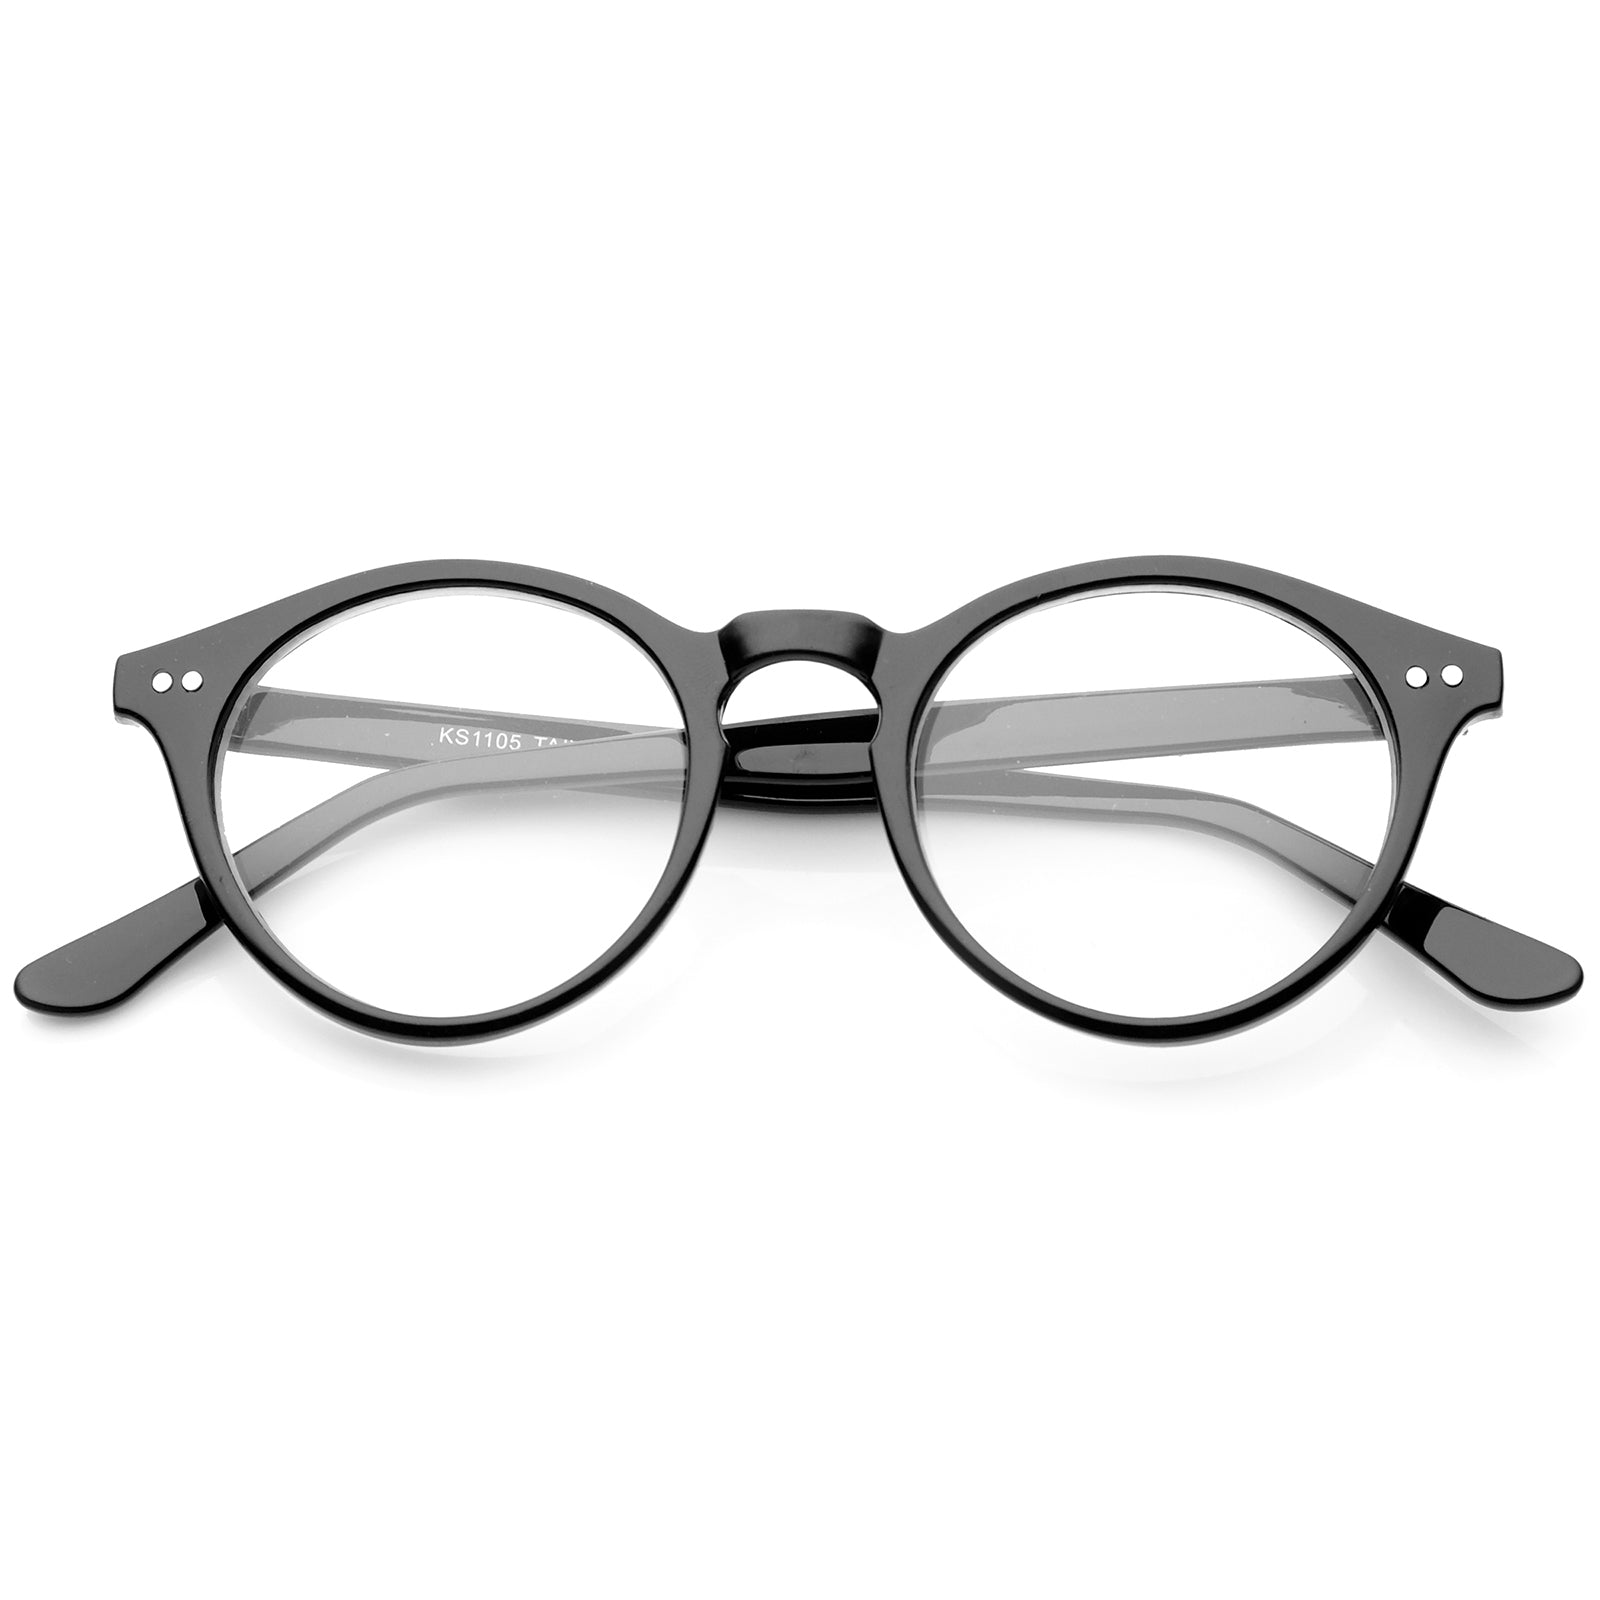 Womens Small Oval Glasses Slim Arms Clear Lens 48mm (Black / Clear)